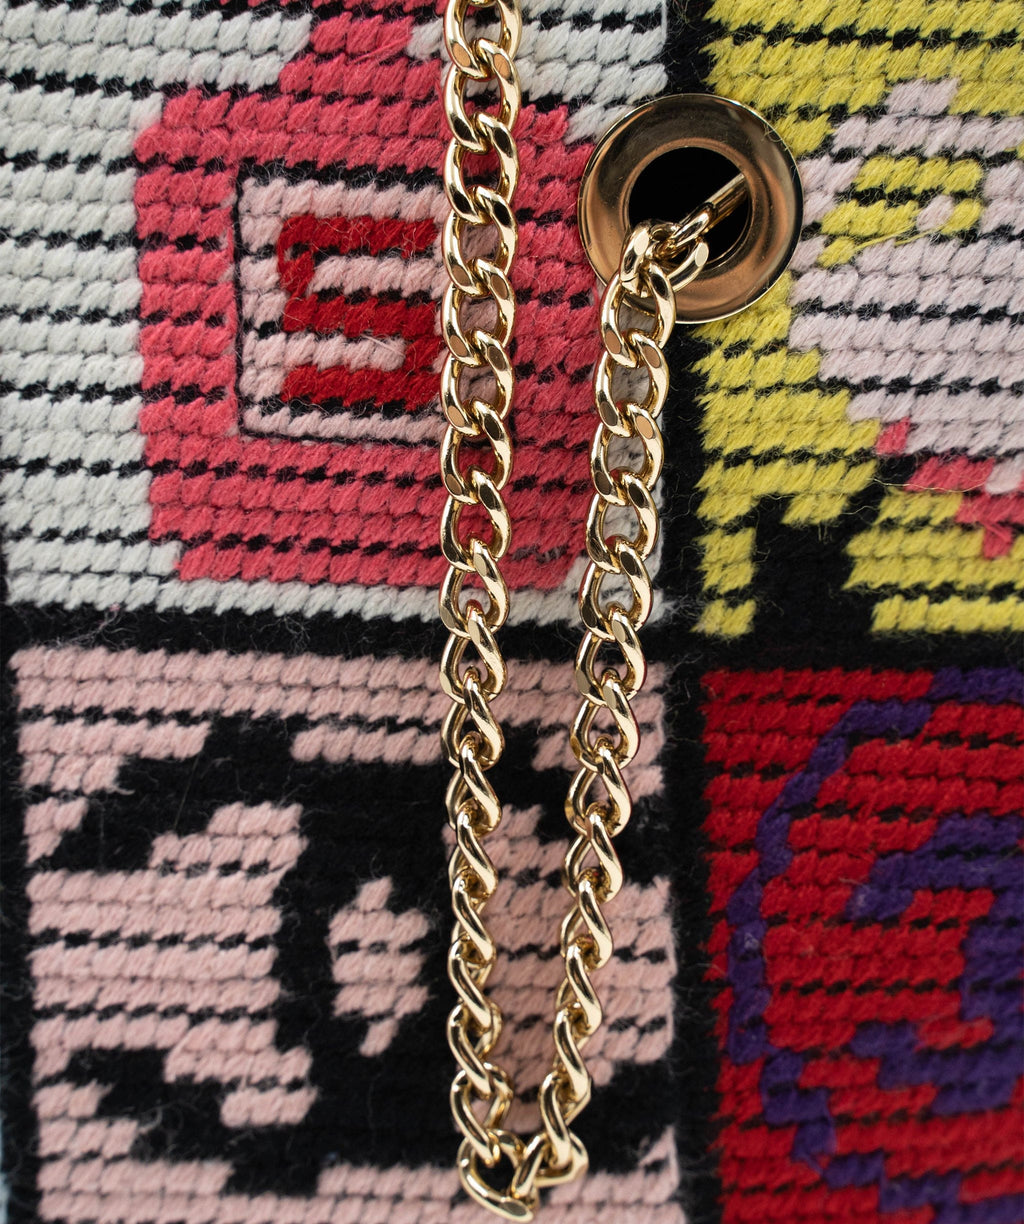 CHANEL needlepoint lucky charms patchwork pochette bag with gilt